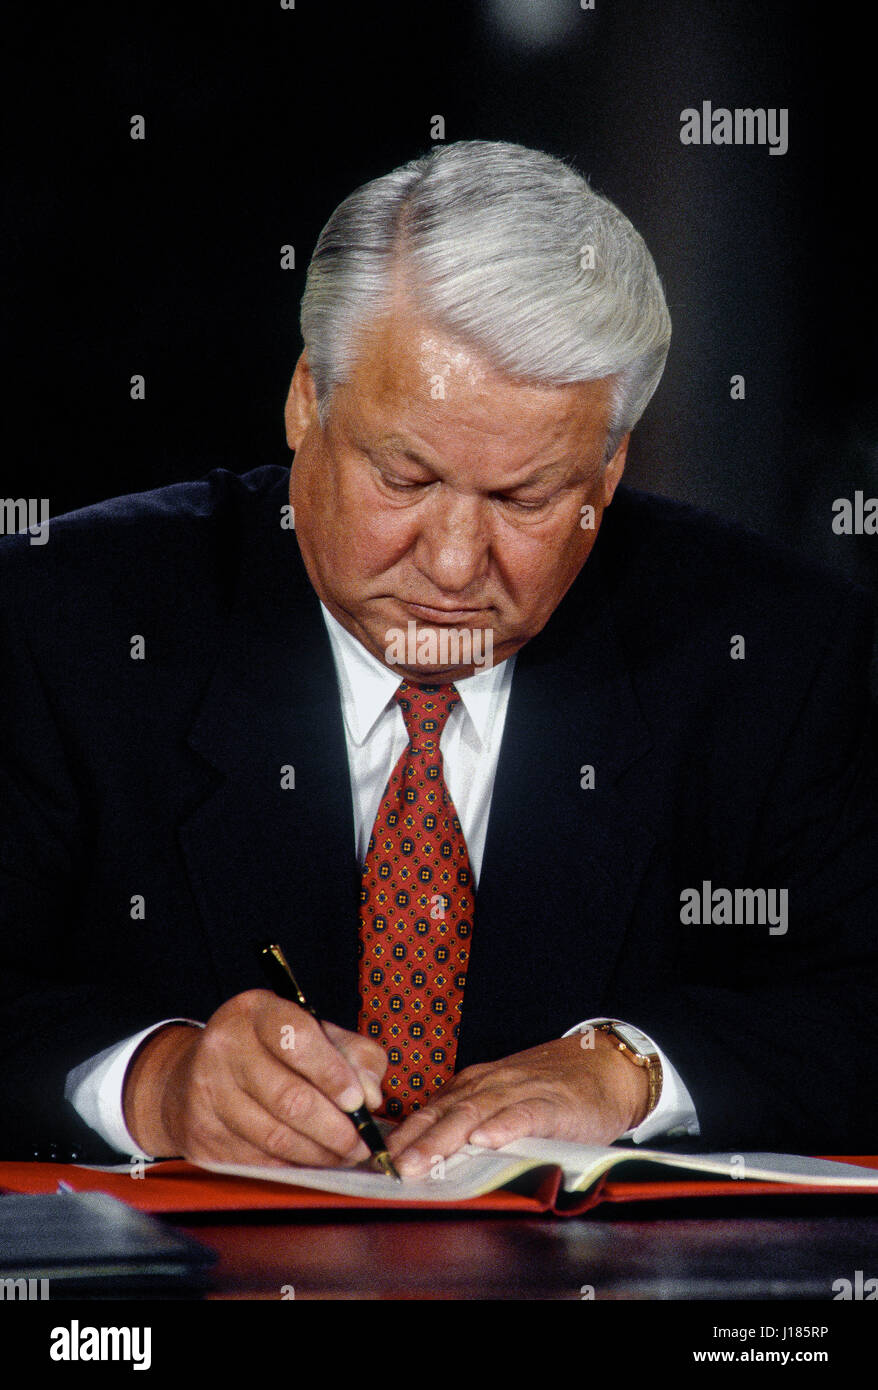 Russian President Boris Yeltsin following the end of two days of summit meetings with President William Clinton signs an agreement to normalize economic relations with the United States durng a joint new conference in the East Room of the White House, Washington DC., September 28, 1994.  Photo by Mark Reinstein Stock Photo